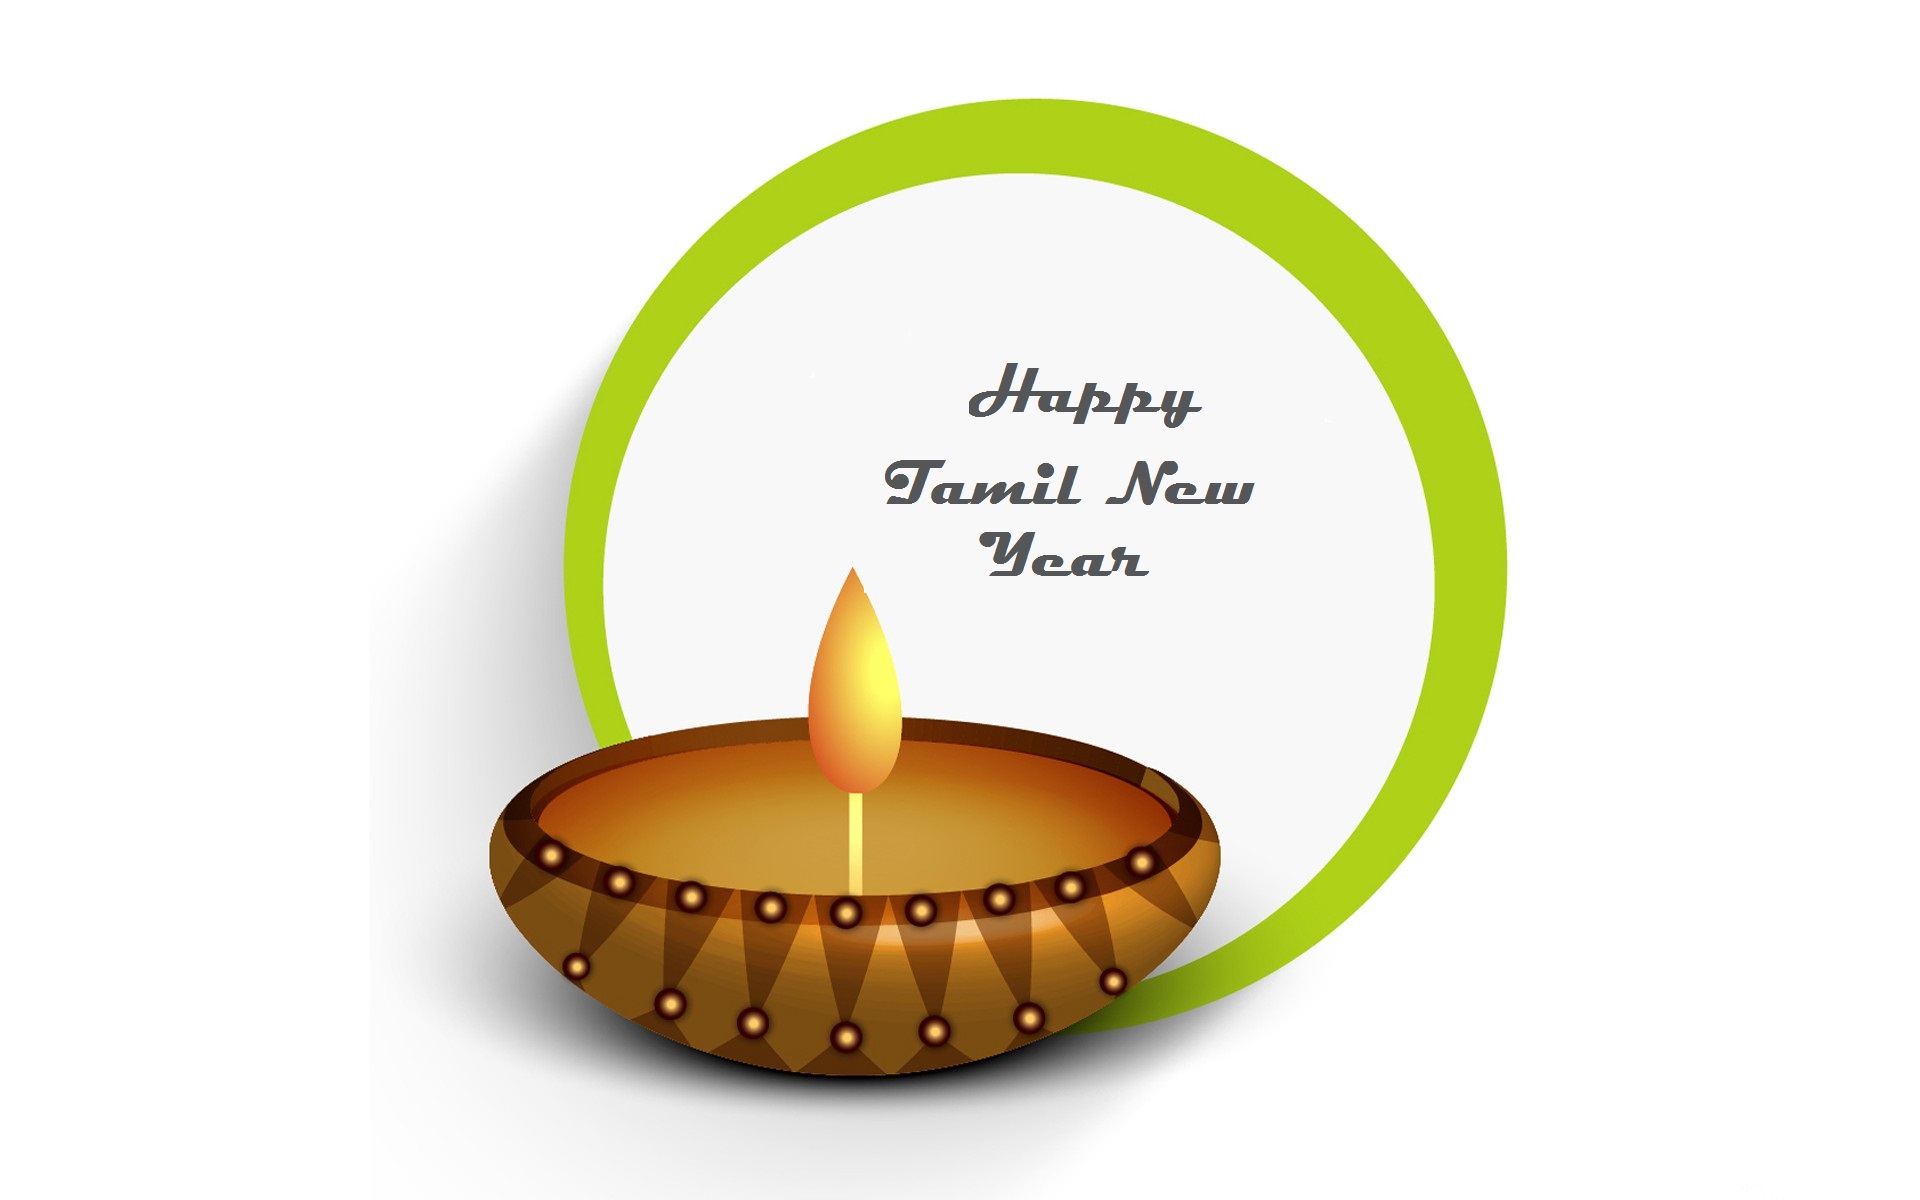 Tamil New Year 2015 wishes, greetings, images, SMS, Messages, pictures